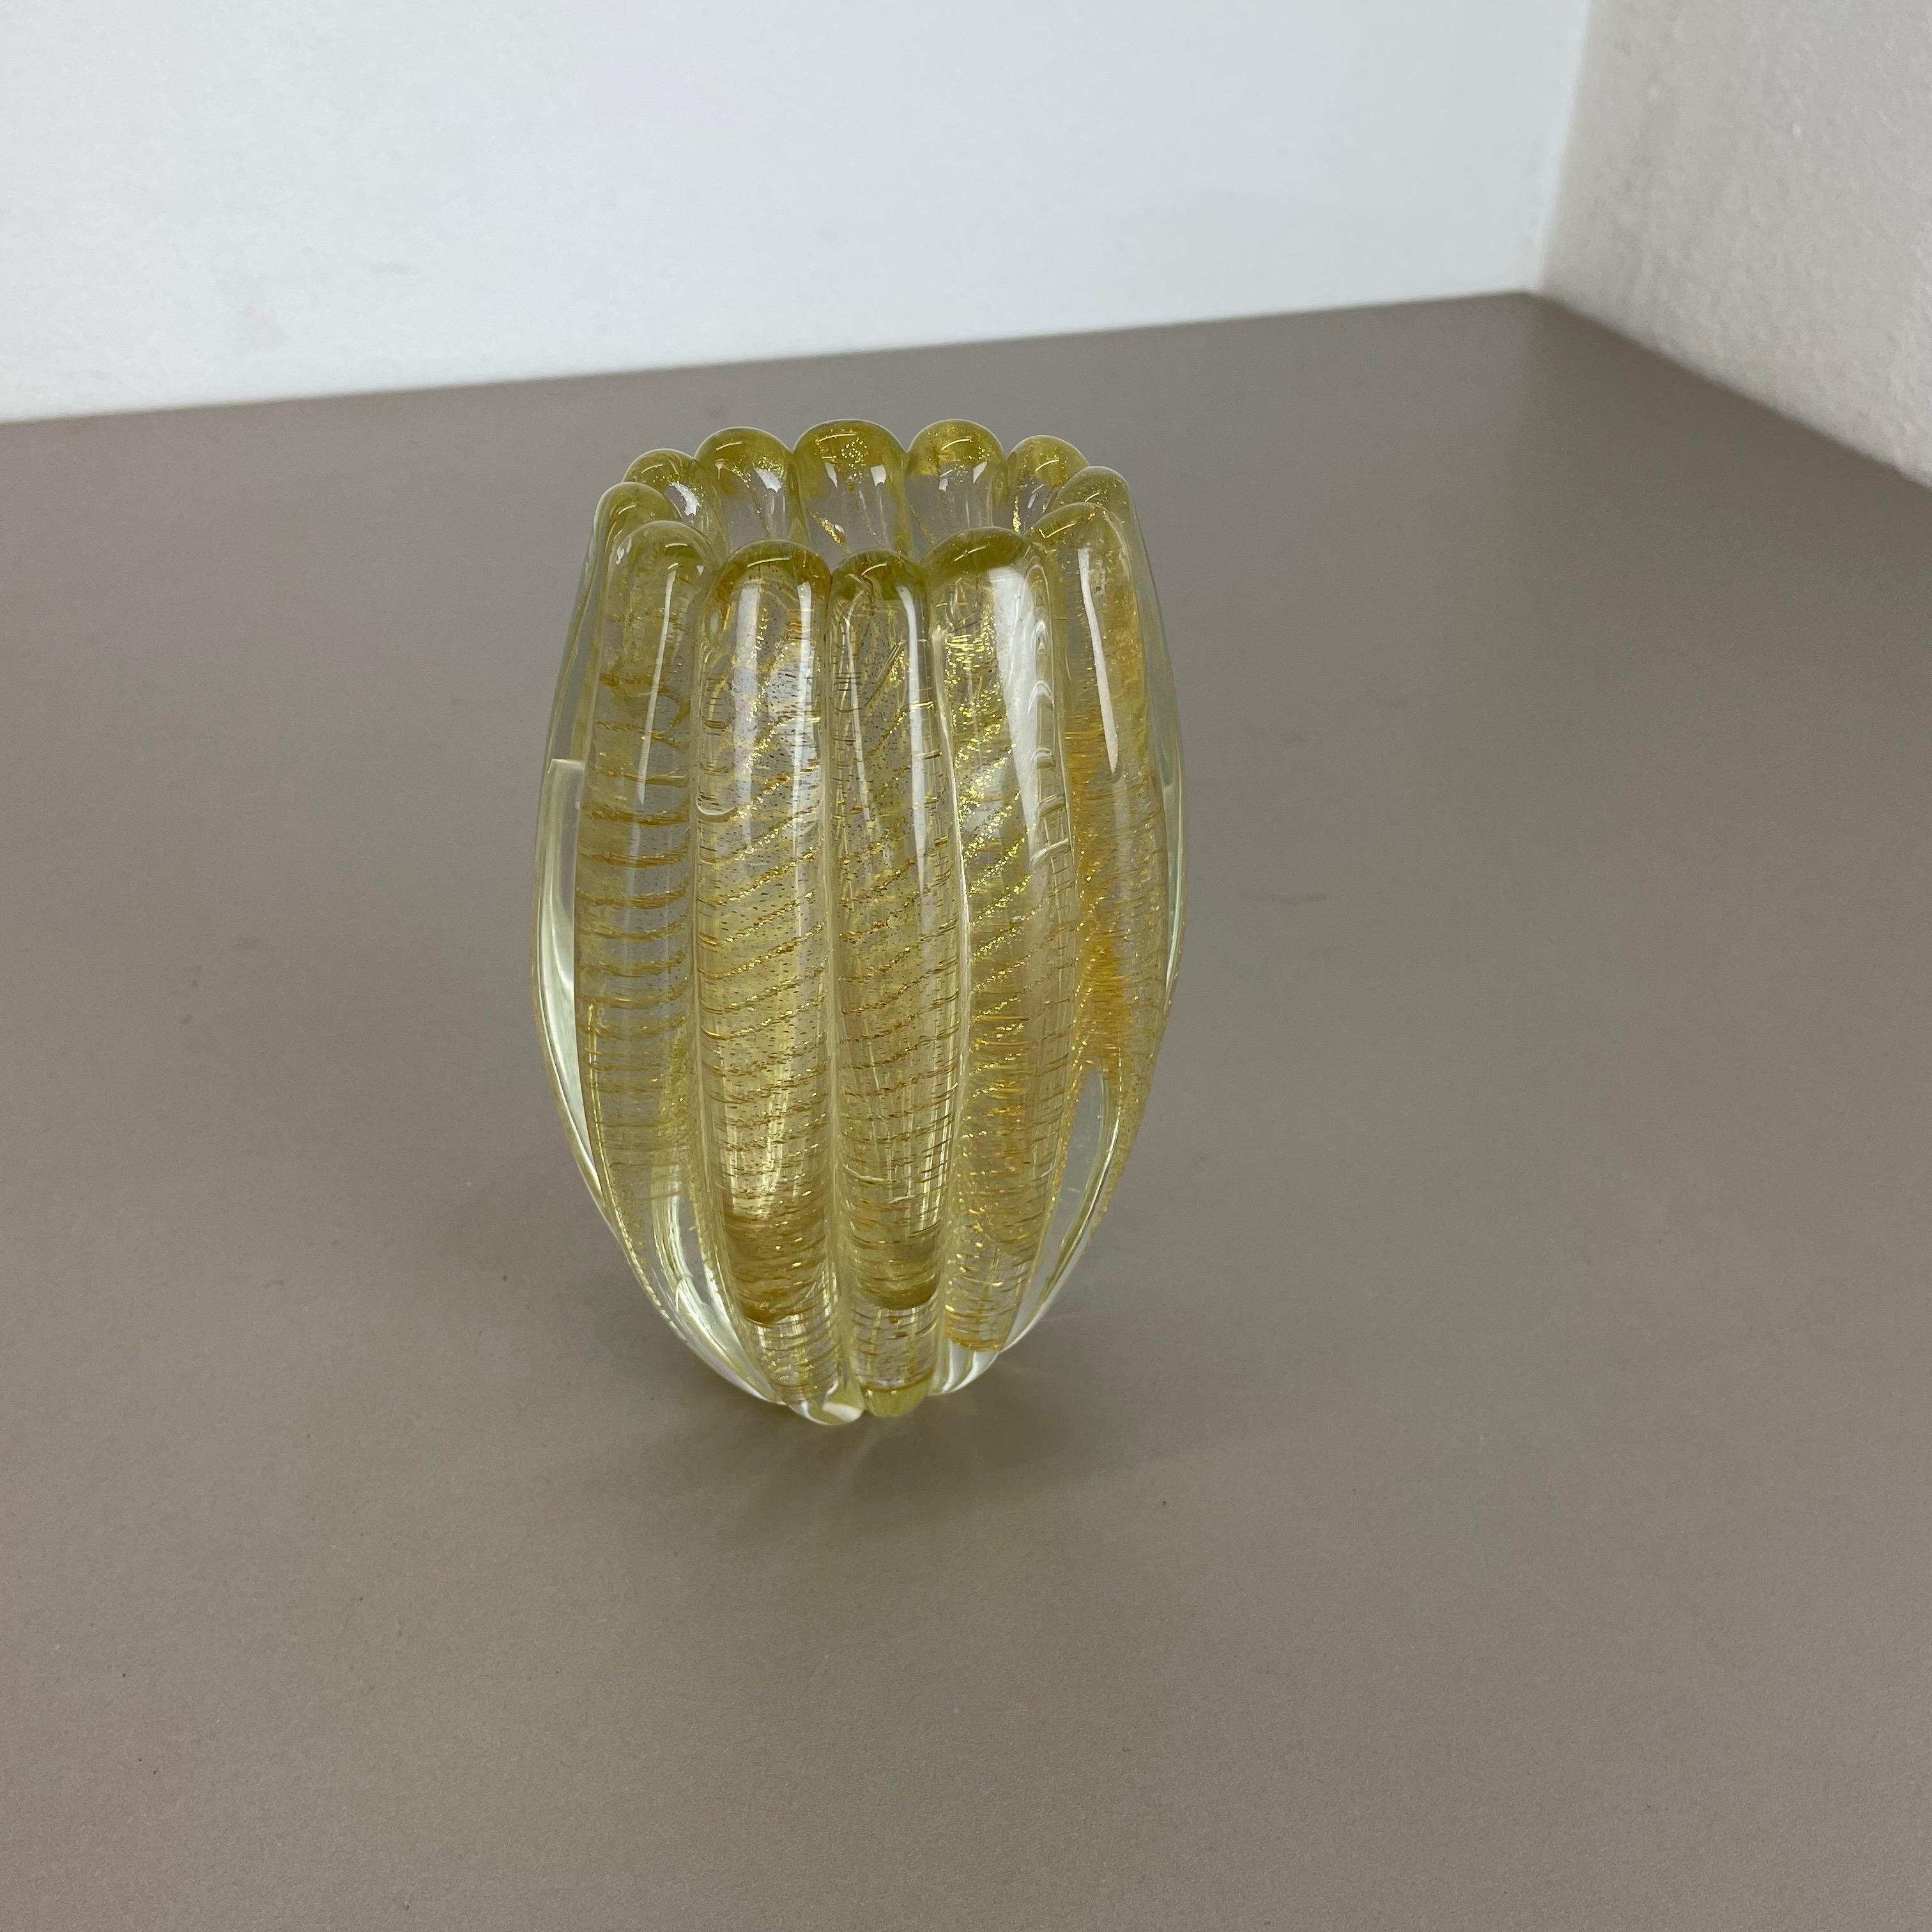 Article:

Murano glass vase element by Barovier and Toso


Origin:

Murano, Italy


Decade:

1970s



This original vintage glass vase element was produced in the 1970s in Murano, Italy. It is made in murano technique and has a